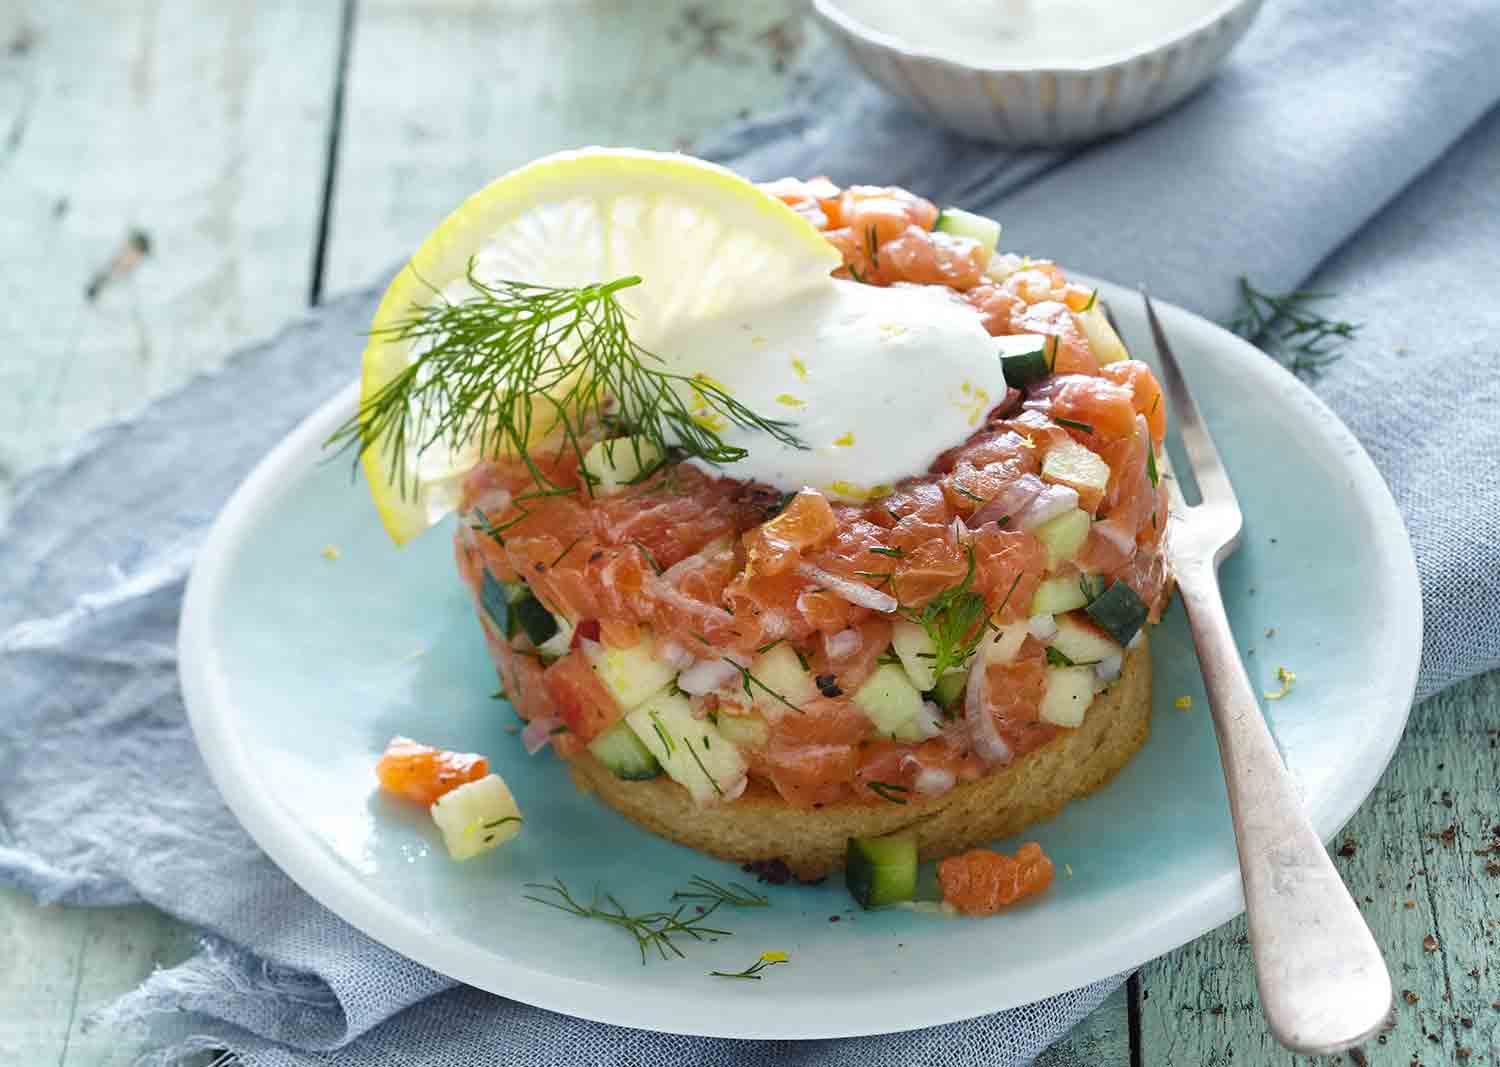 Salmon tartare is an appetiser  with apple, cucumber and dill, on a golden baked crouton.